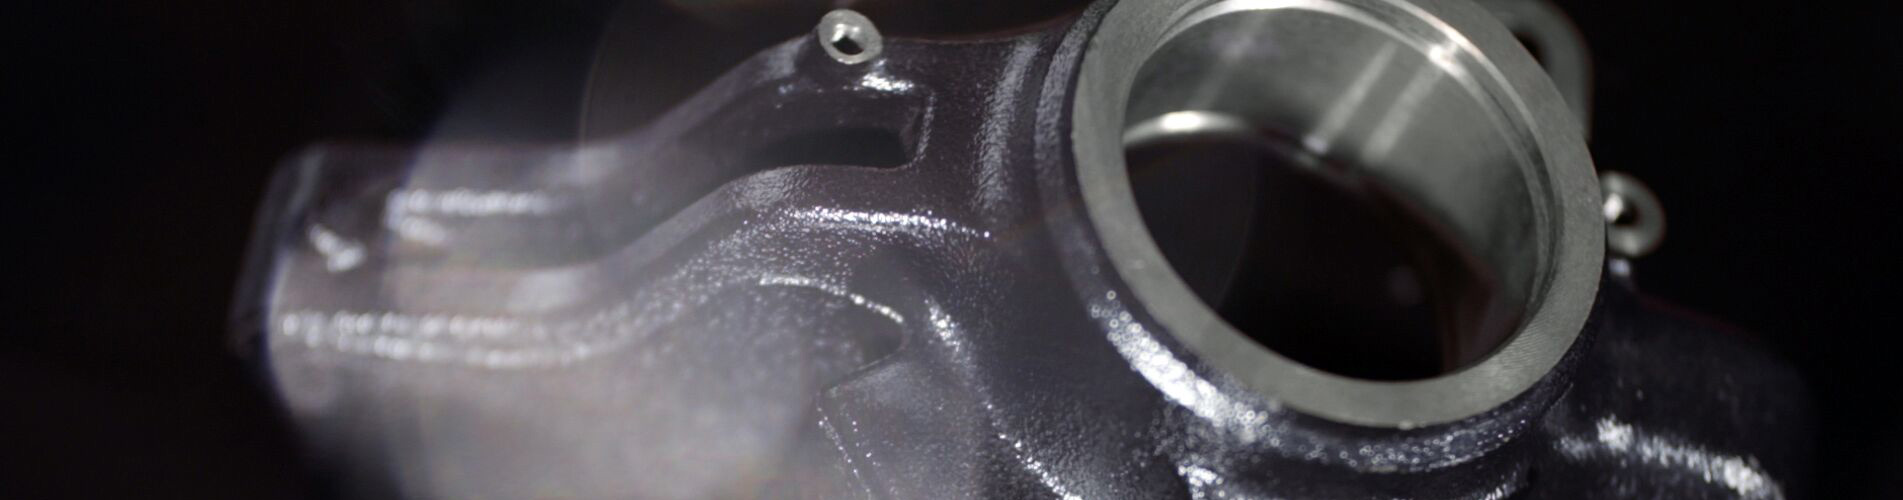 Steering Knuckle Hub Listing - MAT Foundry